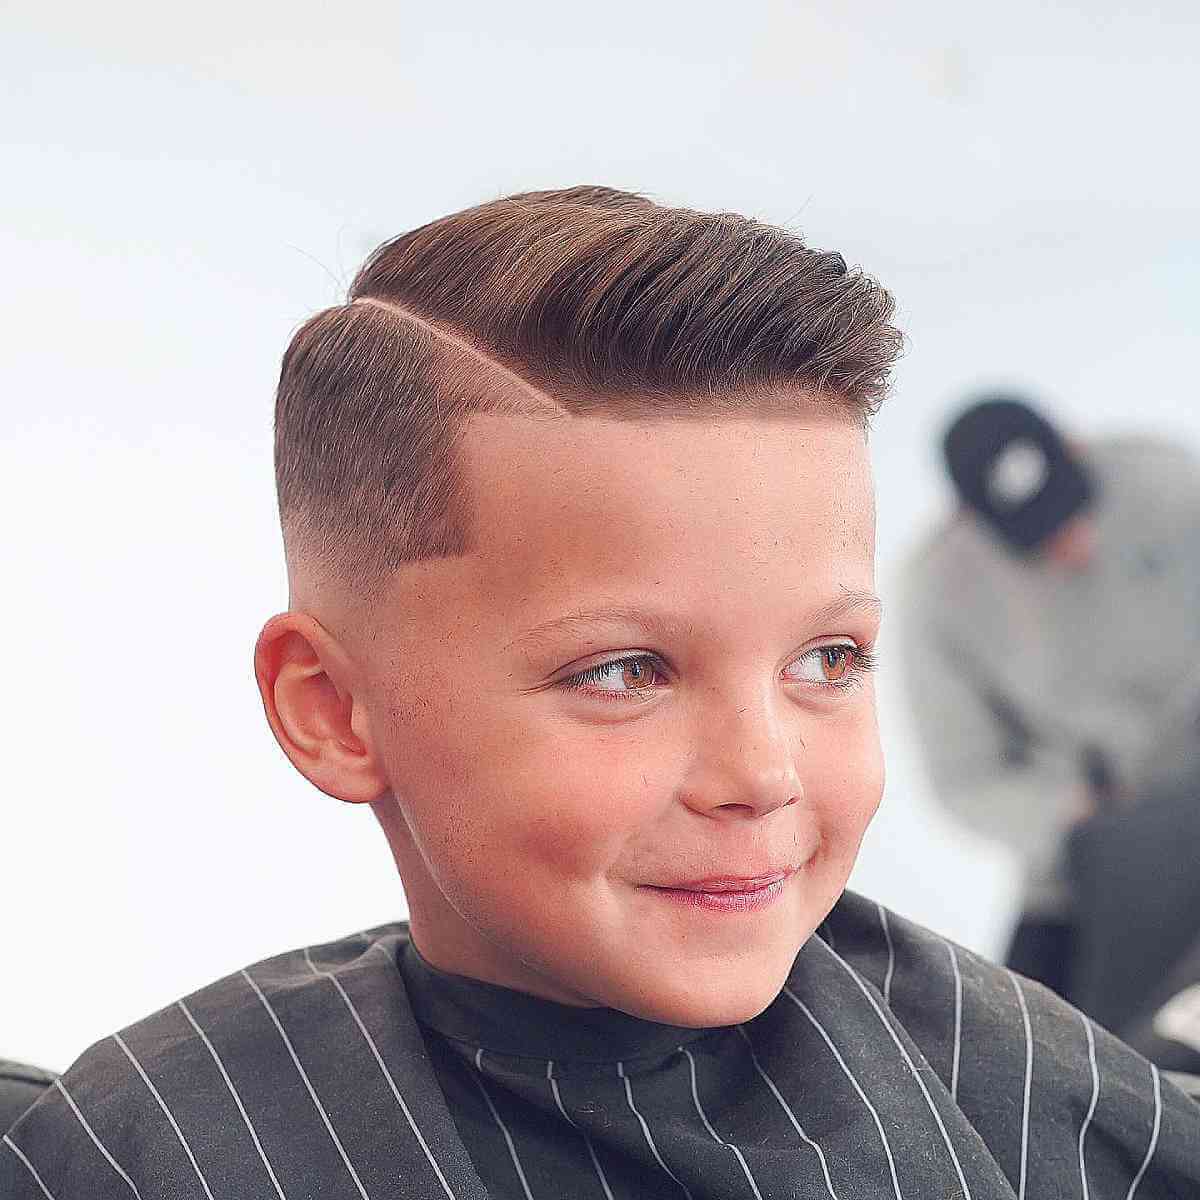 Skin Fade with a Hard Side Part for Young Boys